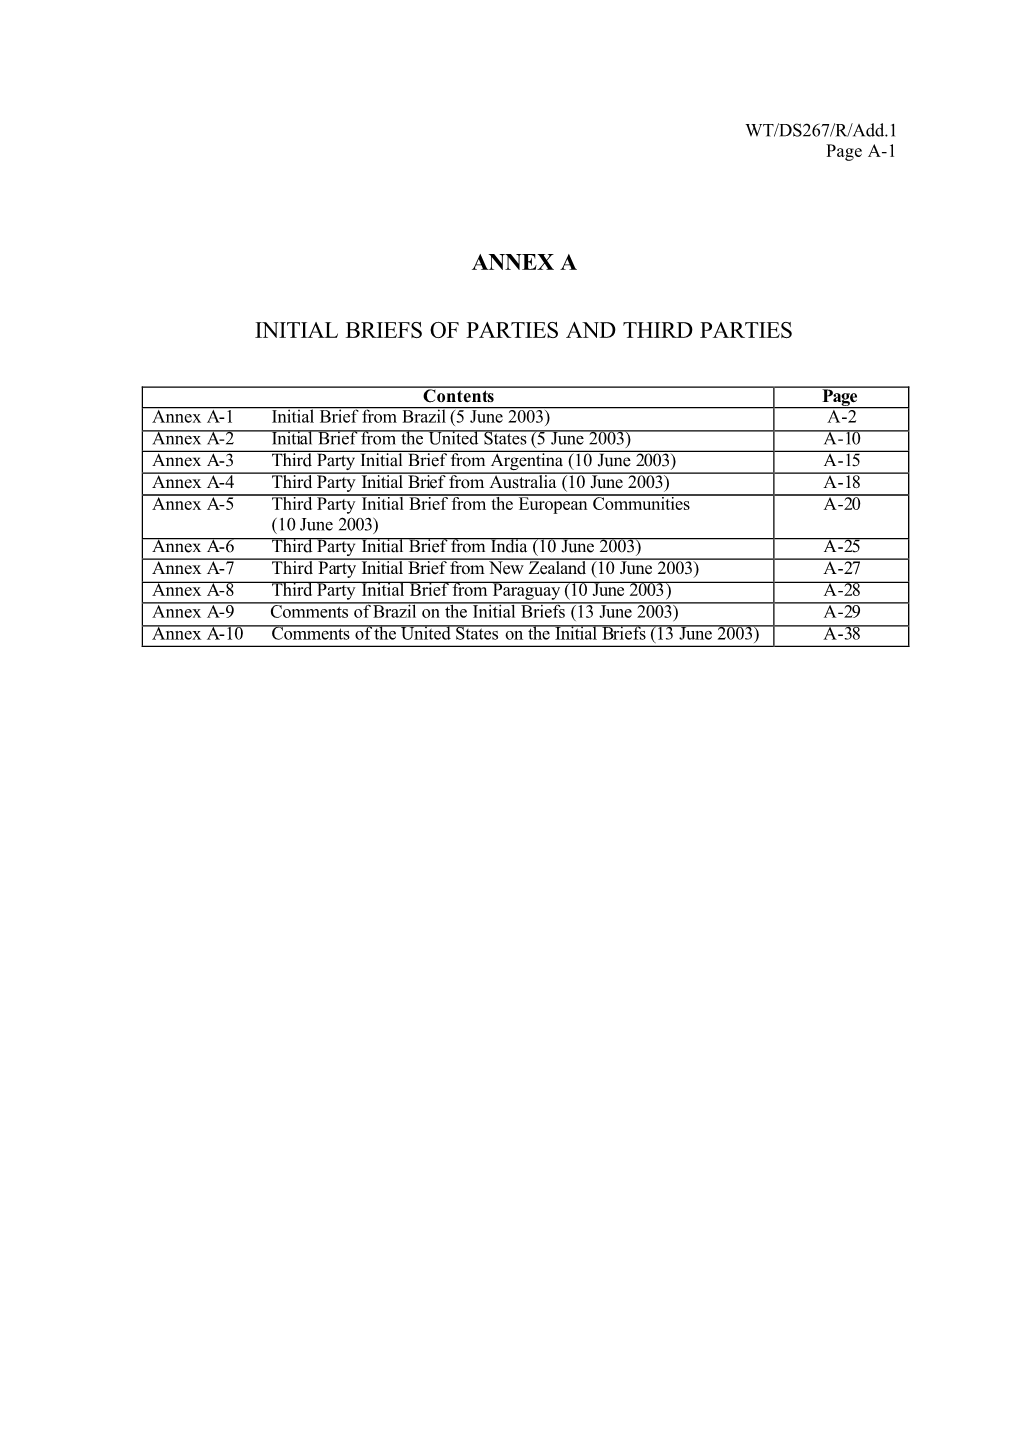 Annex a Initial Briefs of Parties and Third Parties